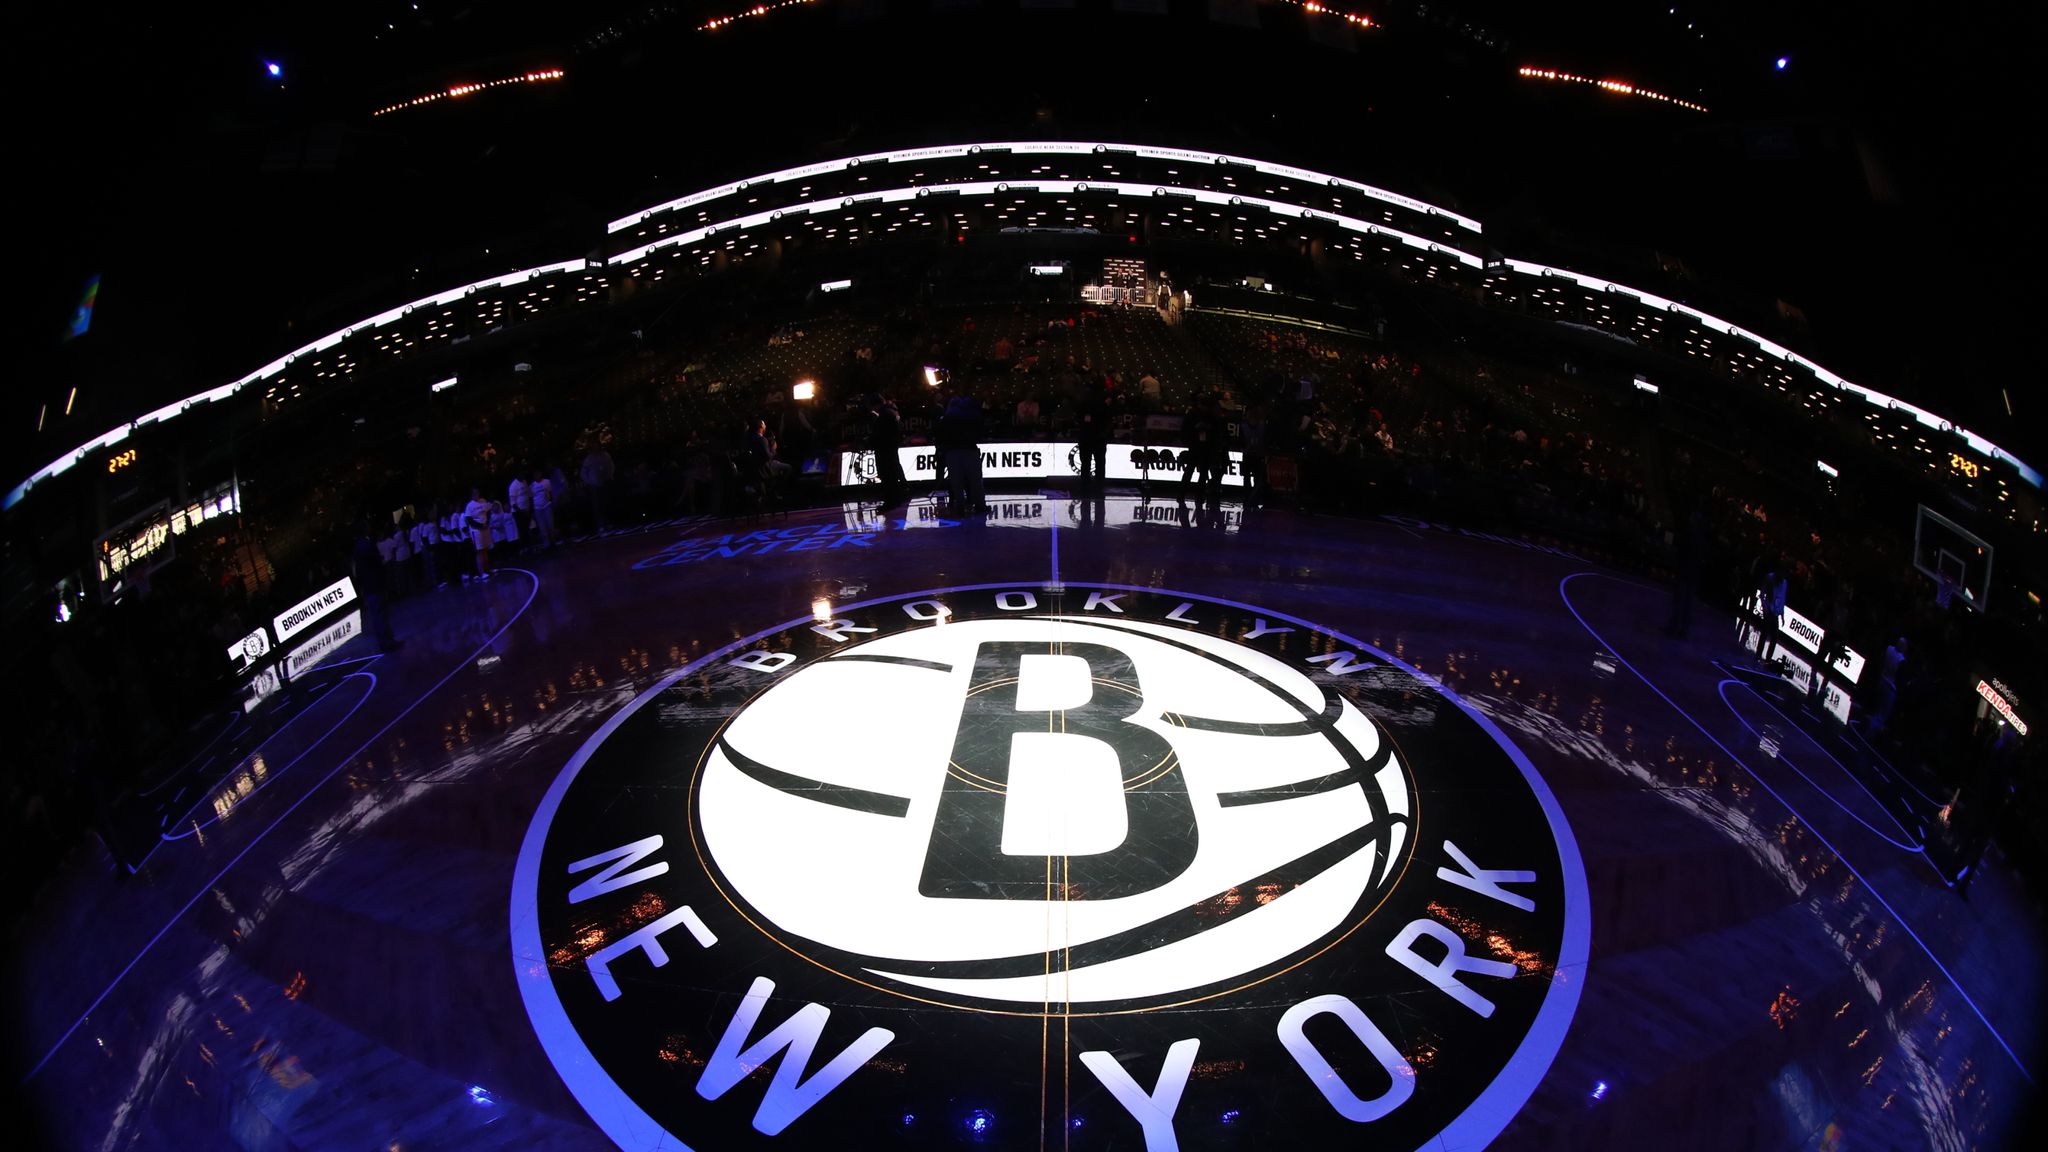 Turetzky, Brooklyn Nets' official scorer for 54 years, finally